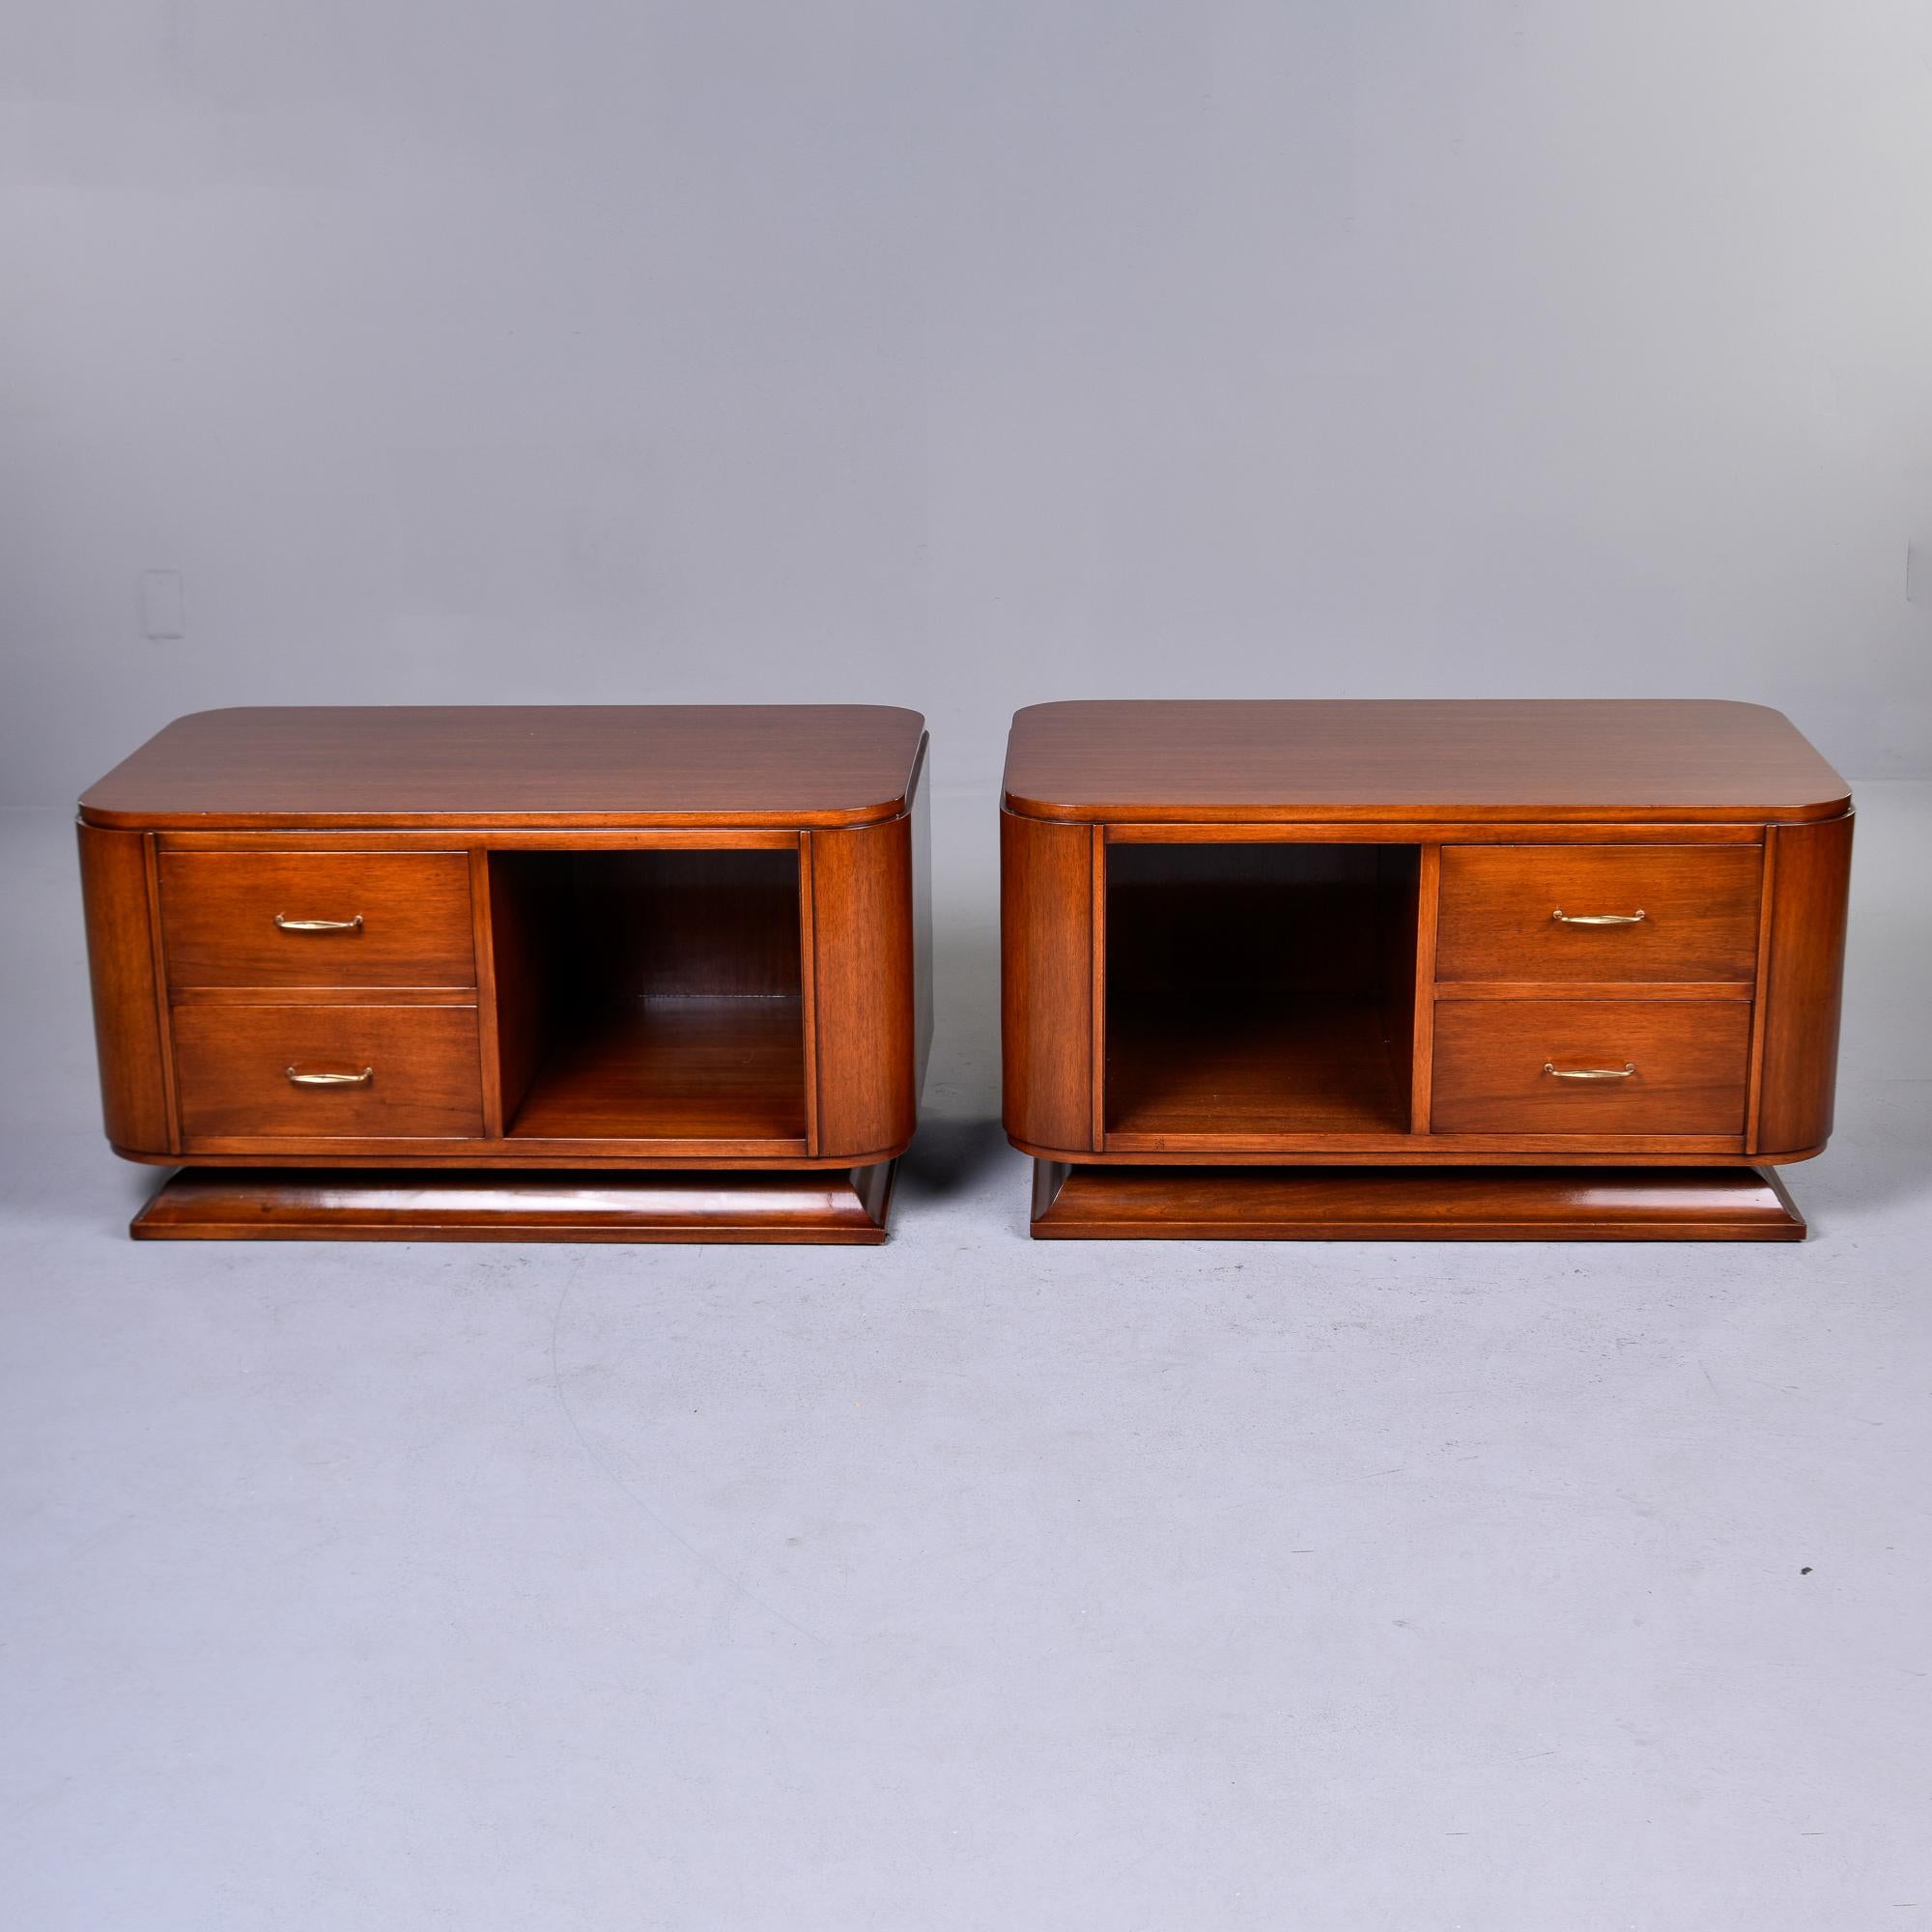 Found in France, this pair of Art Deco bedside or end cabinets date from the 1930s. These curvy cabinets are made of walnut with two drawers on one side and an adjoining open storage compartment. Wide, curvy pedestal bases and thin brass handles.